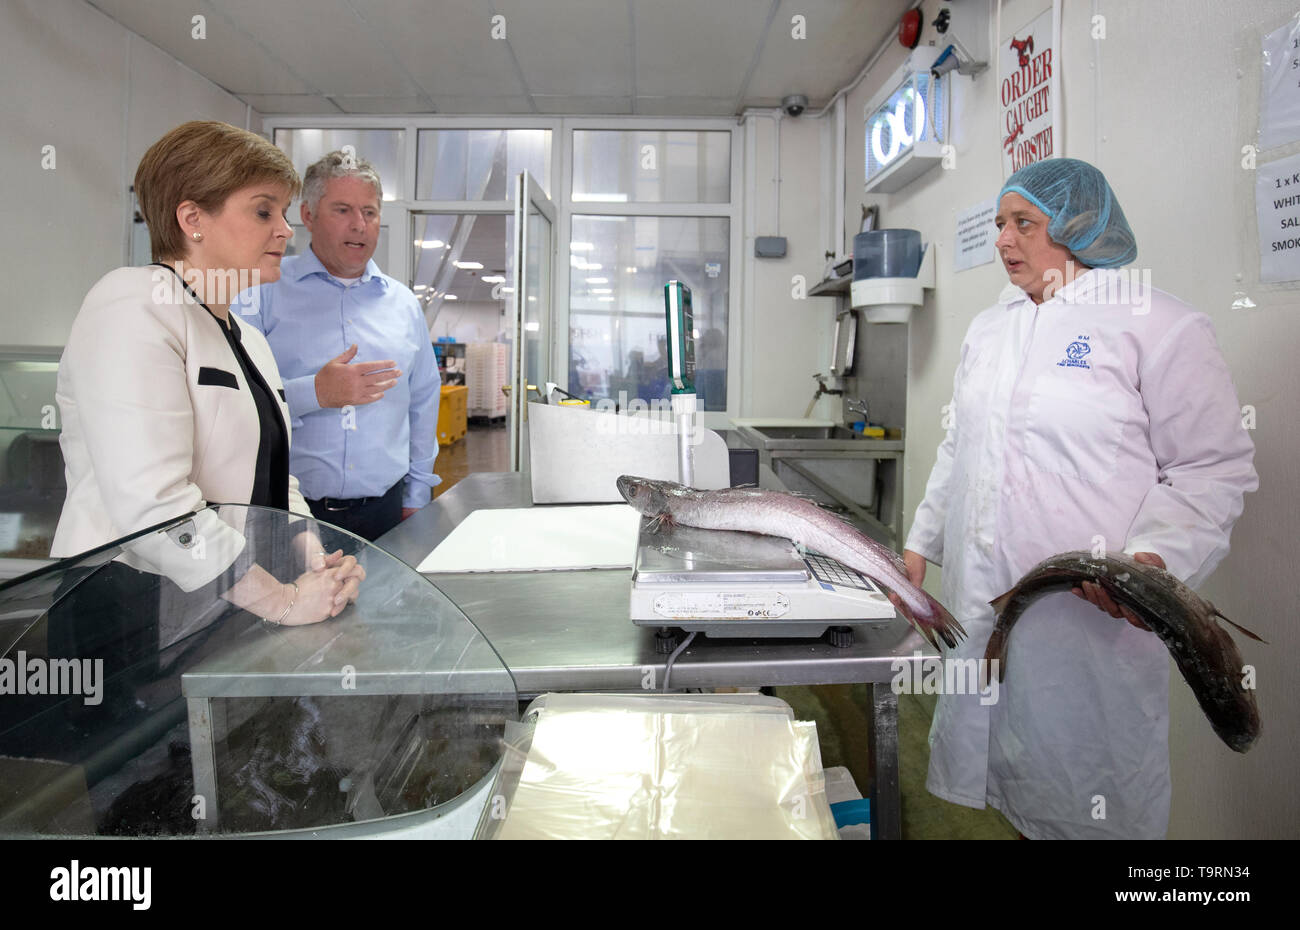 First Minister Nicola Sturgeon with owner Andrew Charles and fishmonger Sarah MacLeod (right) during a visit with SNP European election candidate Christian Allard to J Charles Ltd seafood processing plant in Aberdeen. Christian Allard worked at J Charles Ltd for 25 years exporting seafood to the continent, before he entered politics. Stock Photo